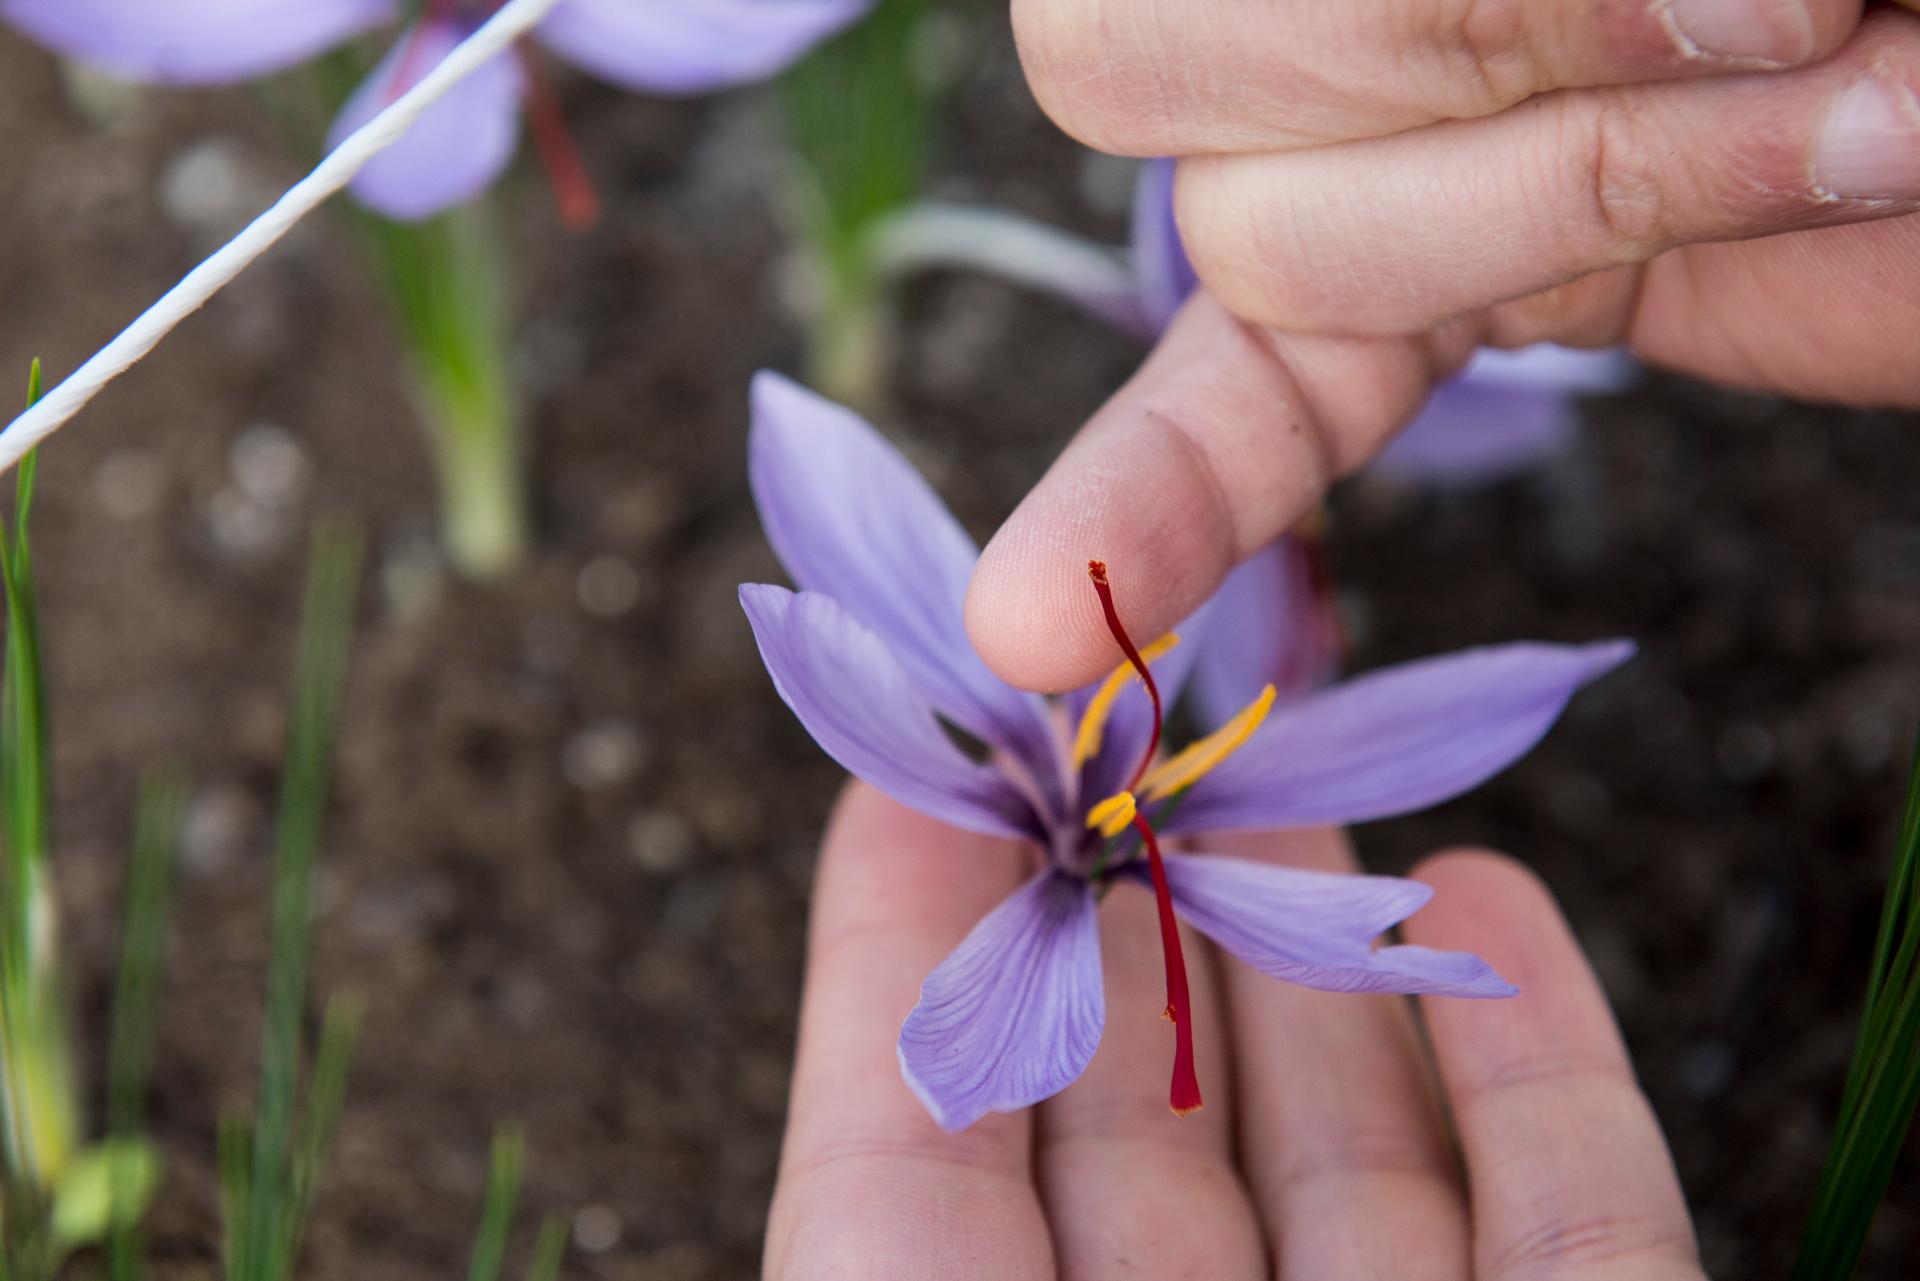 Saffron threads are very delicate and must be picked by hand.